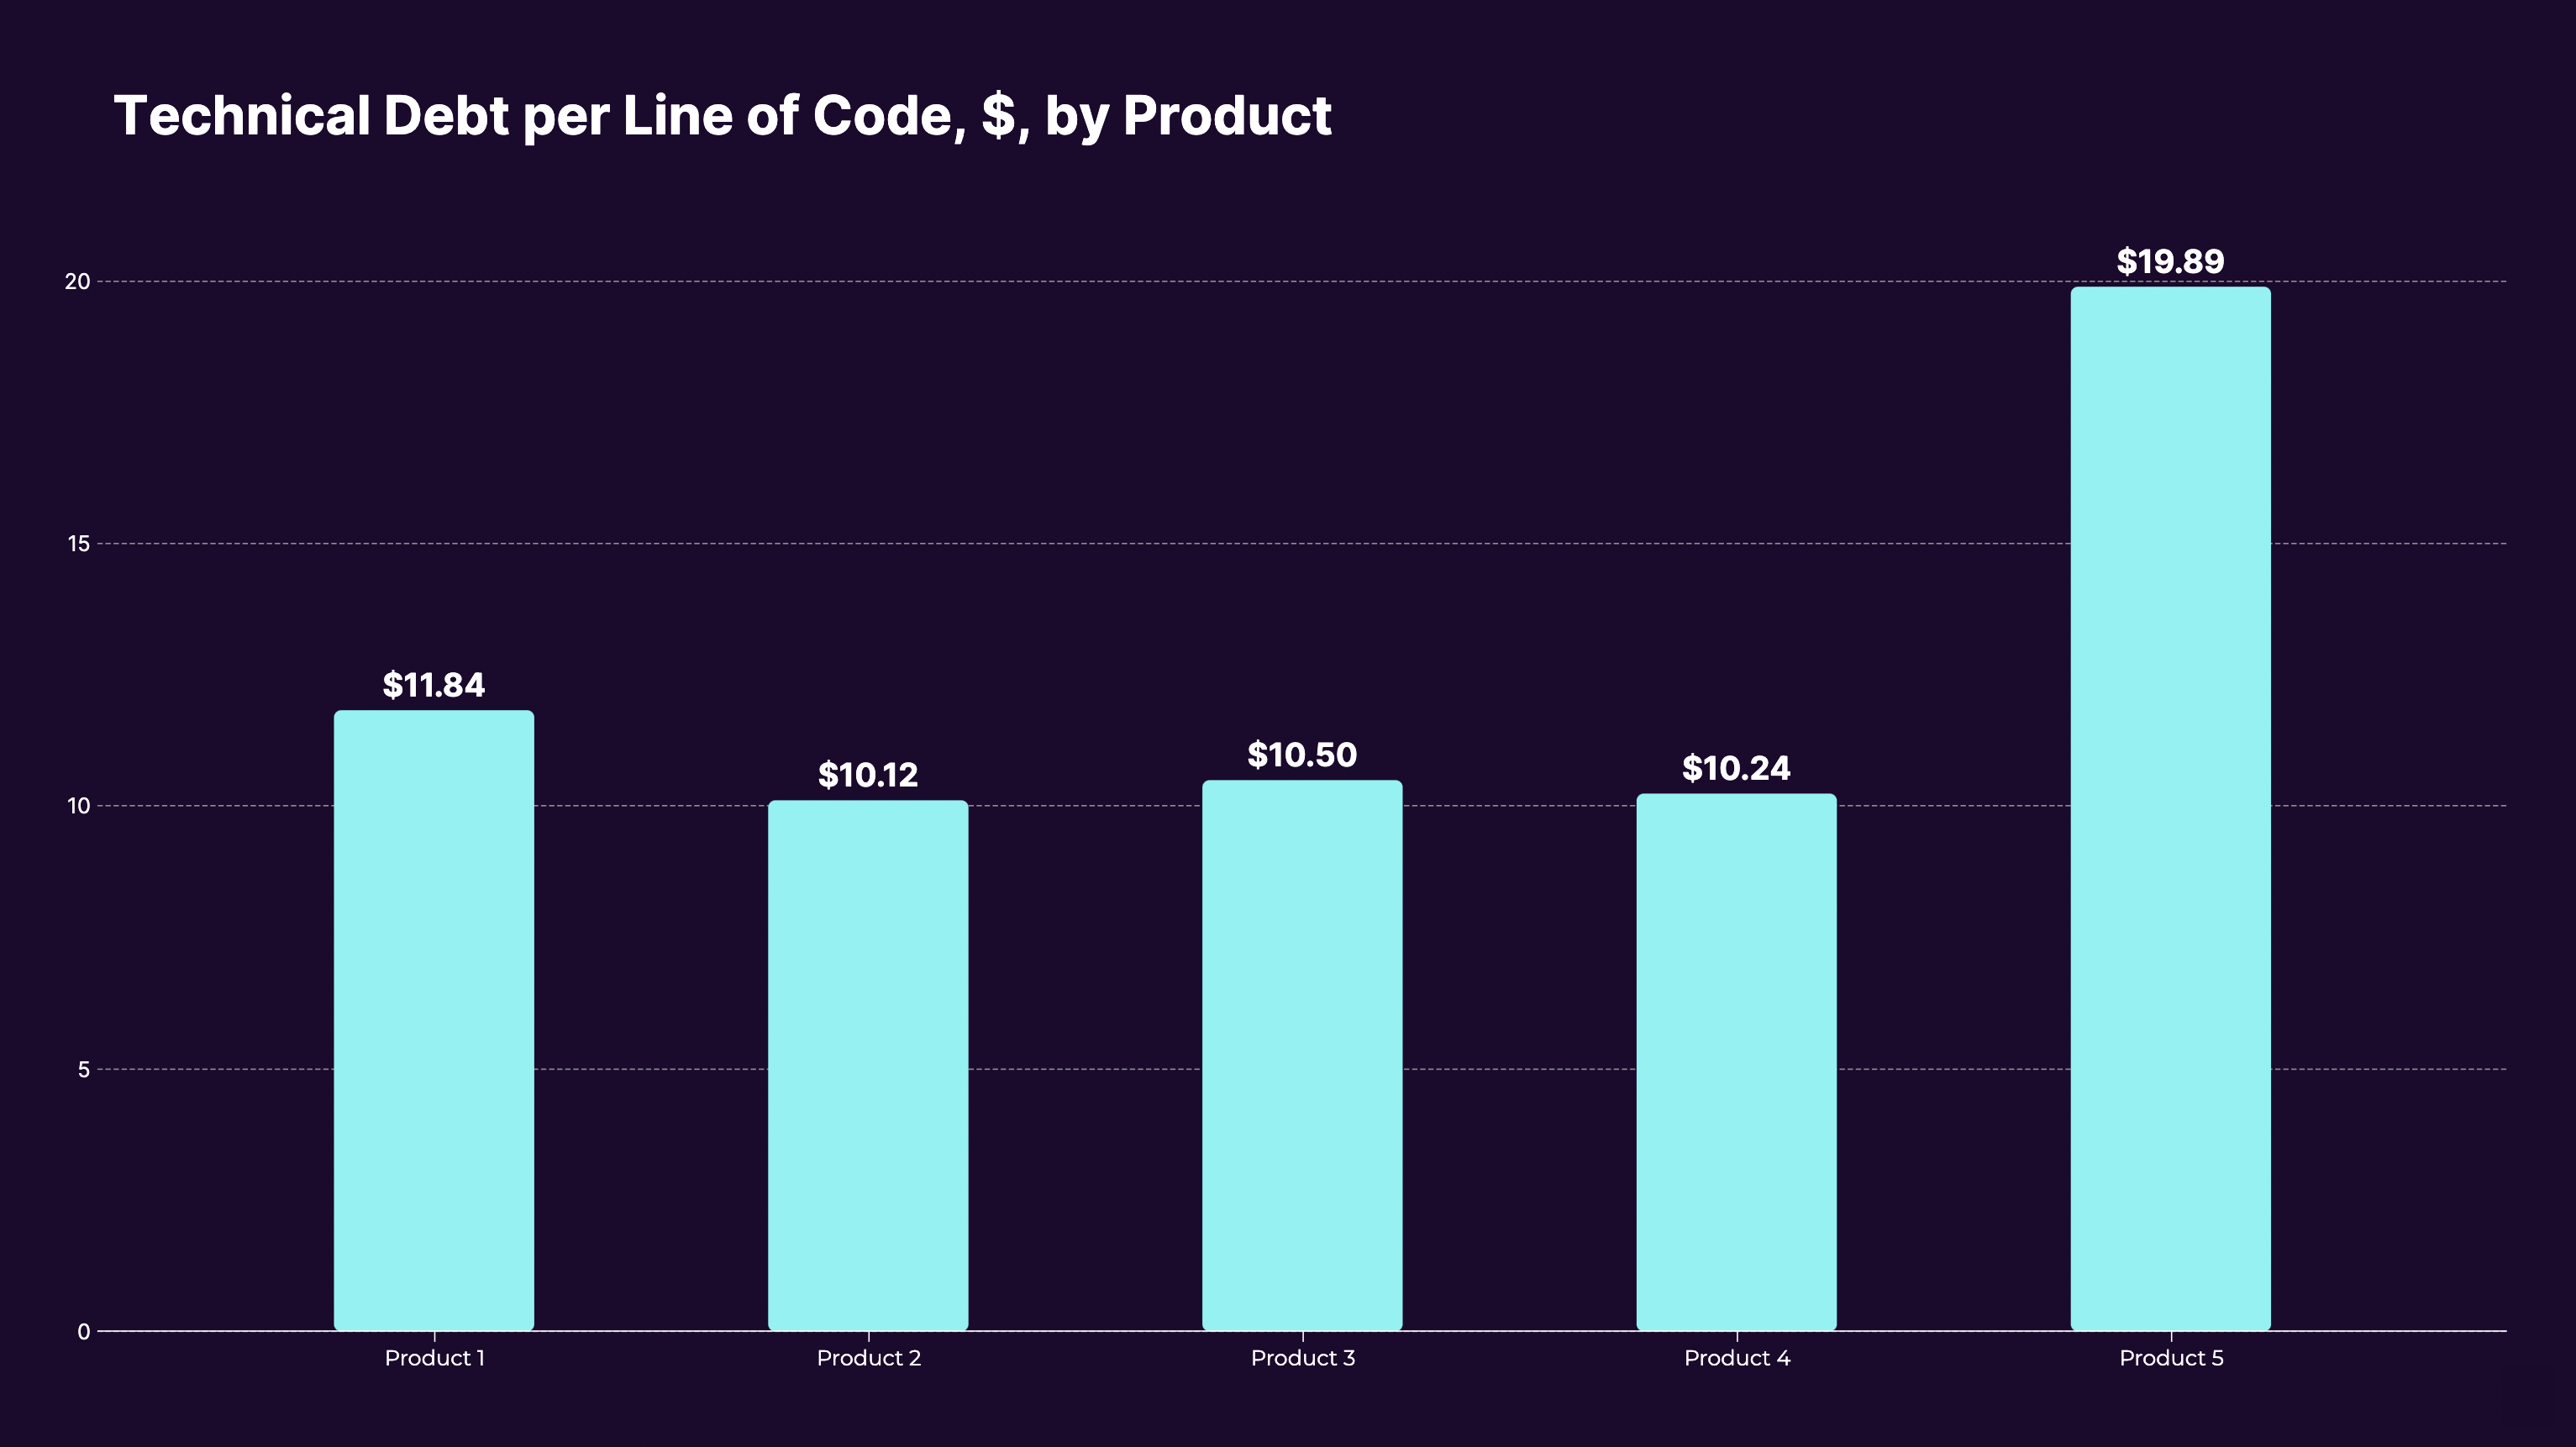 Technical Debt per Line of Code, $, by Product